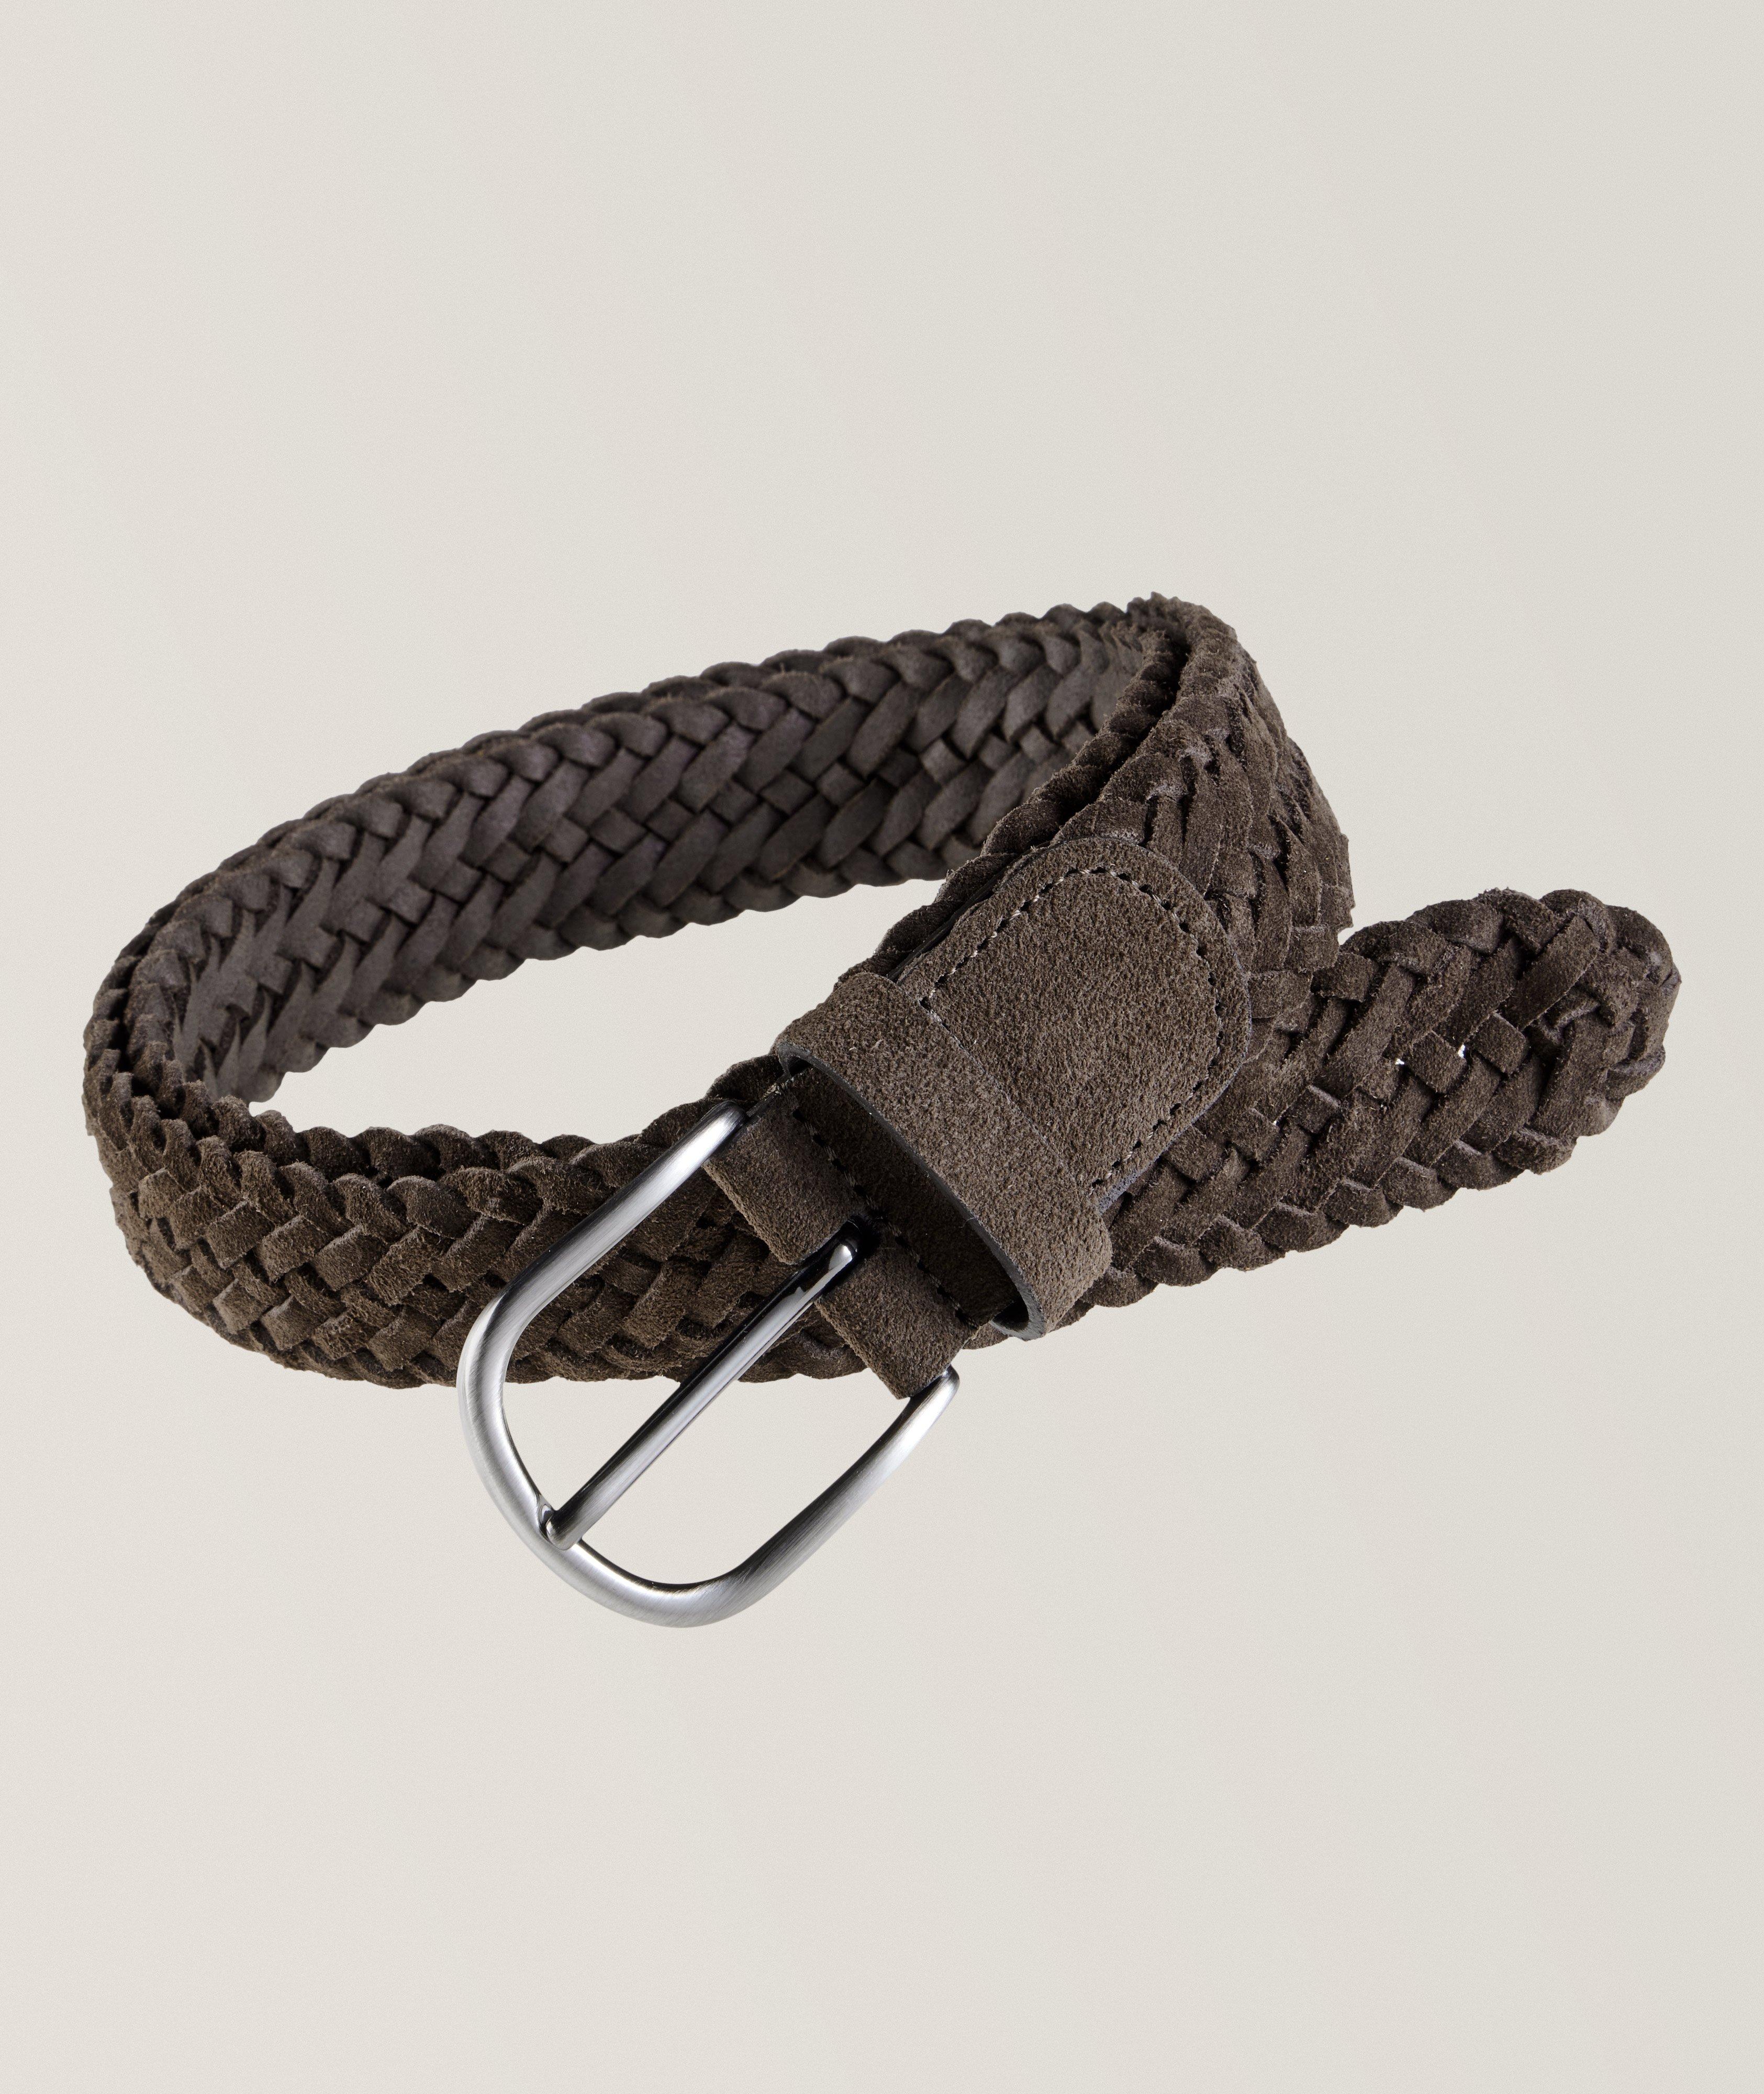 Woven Suede Pin-Buckle Belt image 0